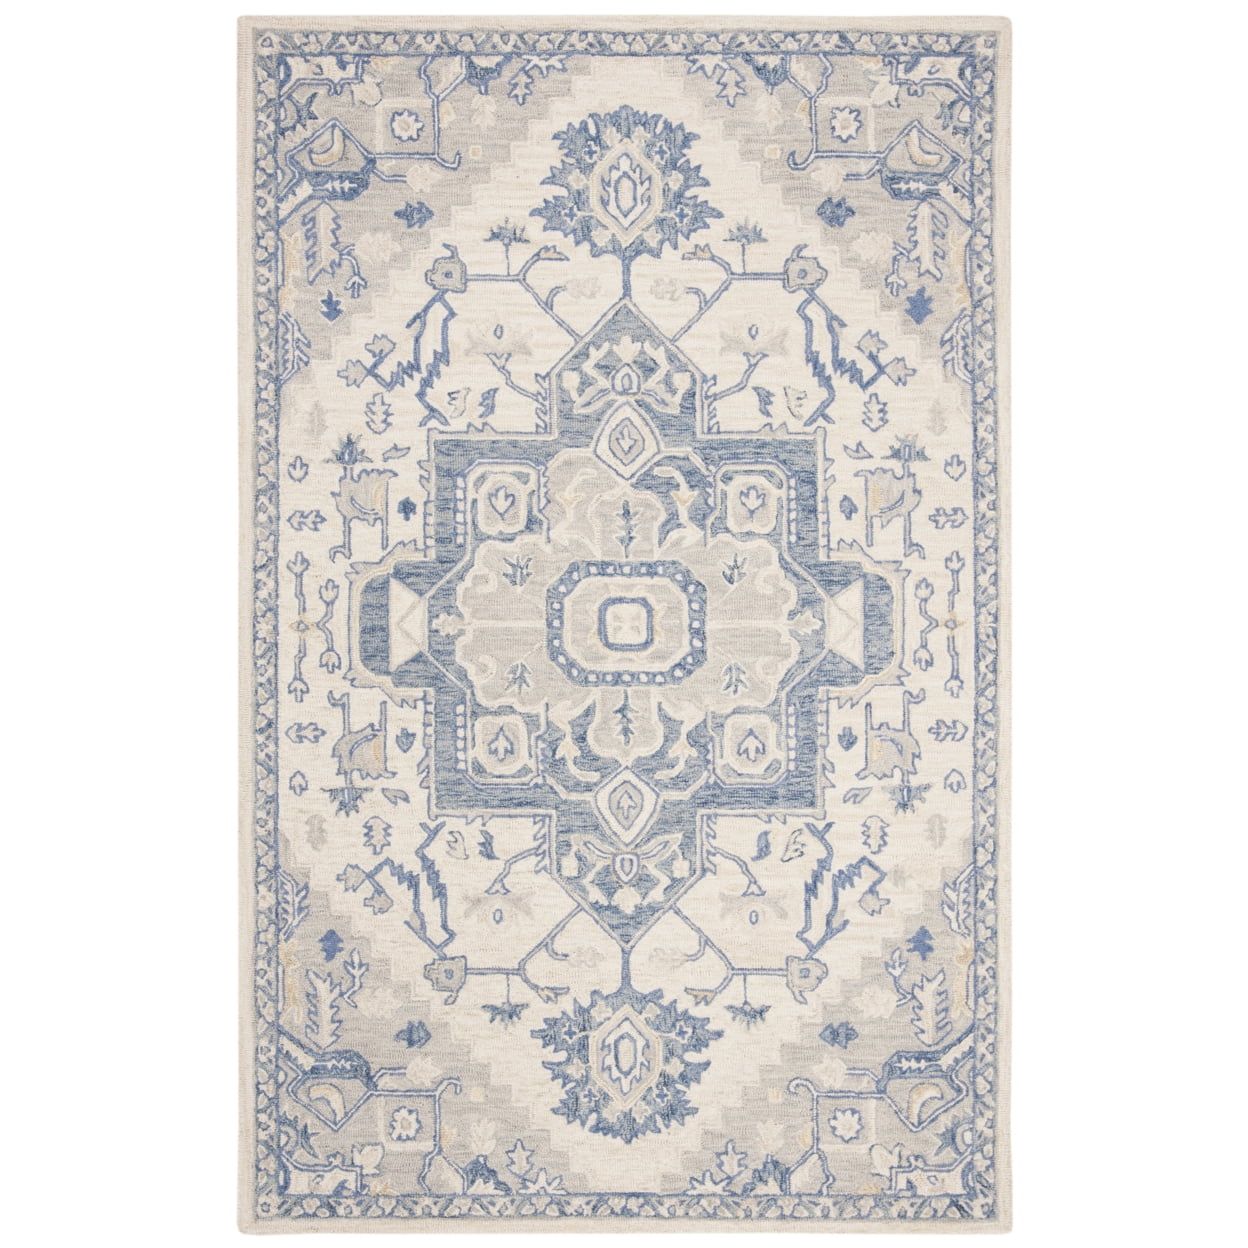 Ivory & Blue Hand-Tufted Wool Accent Rug - 2' 6" x 4'